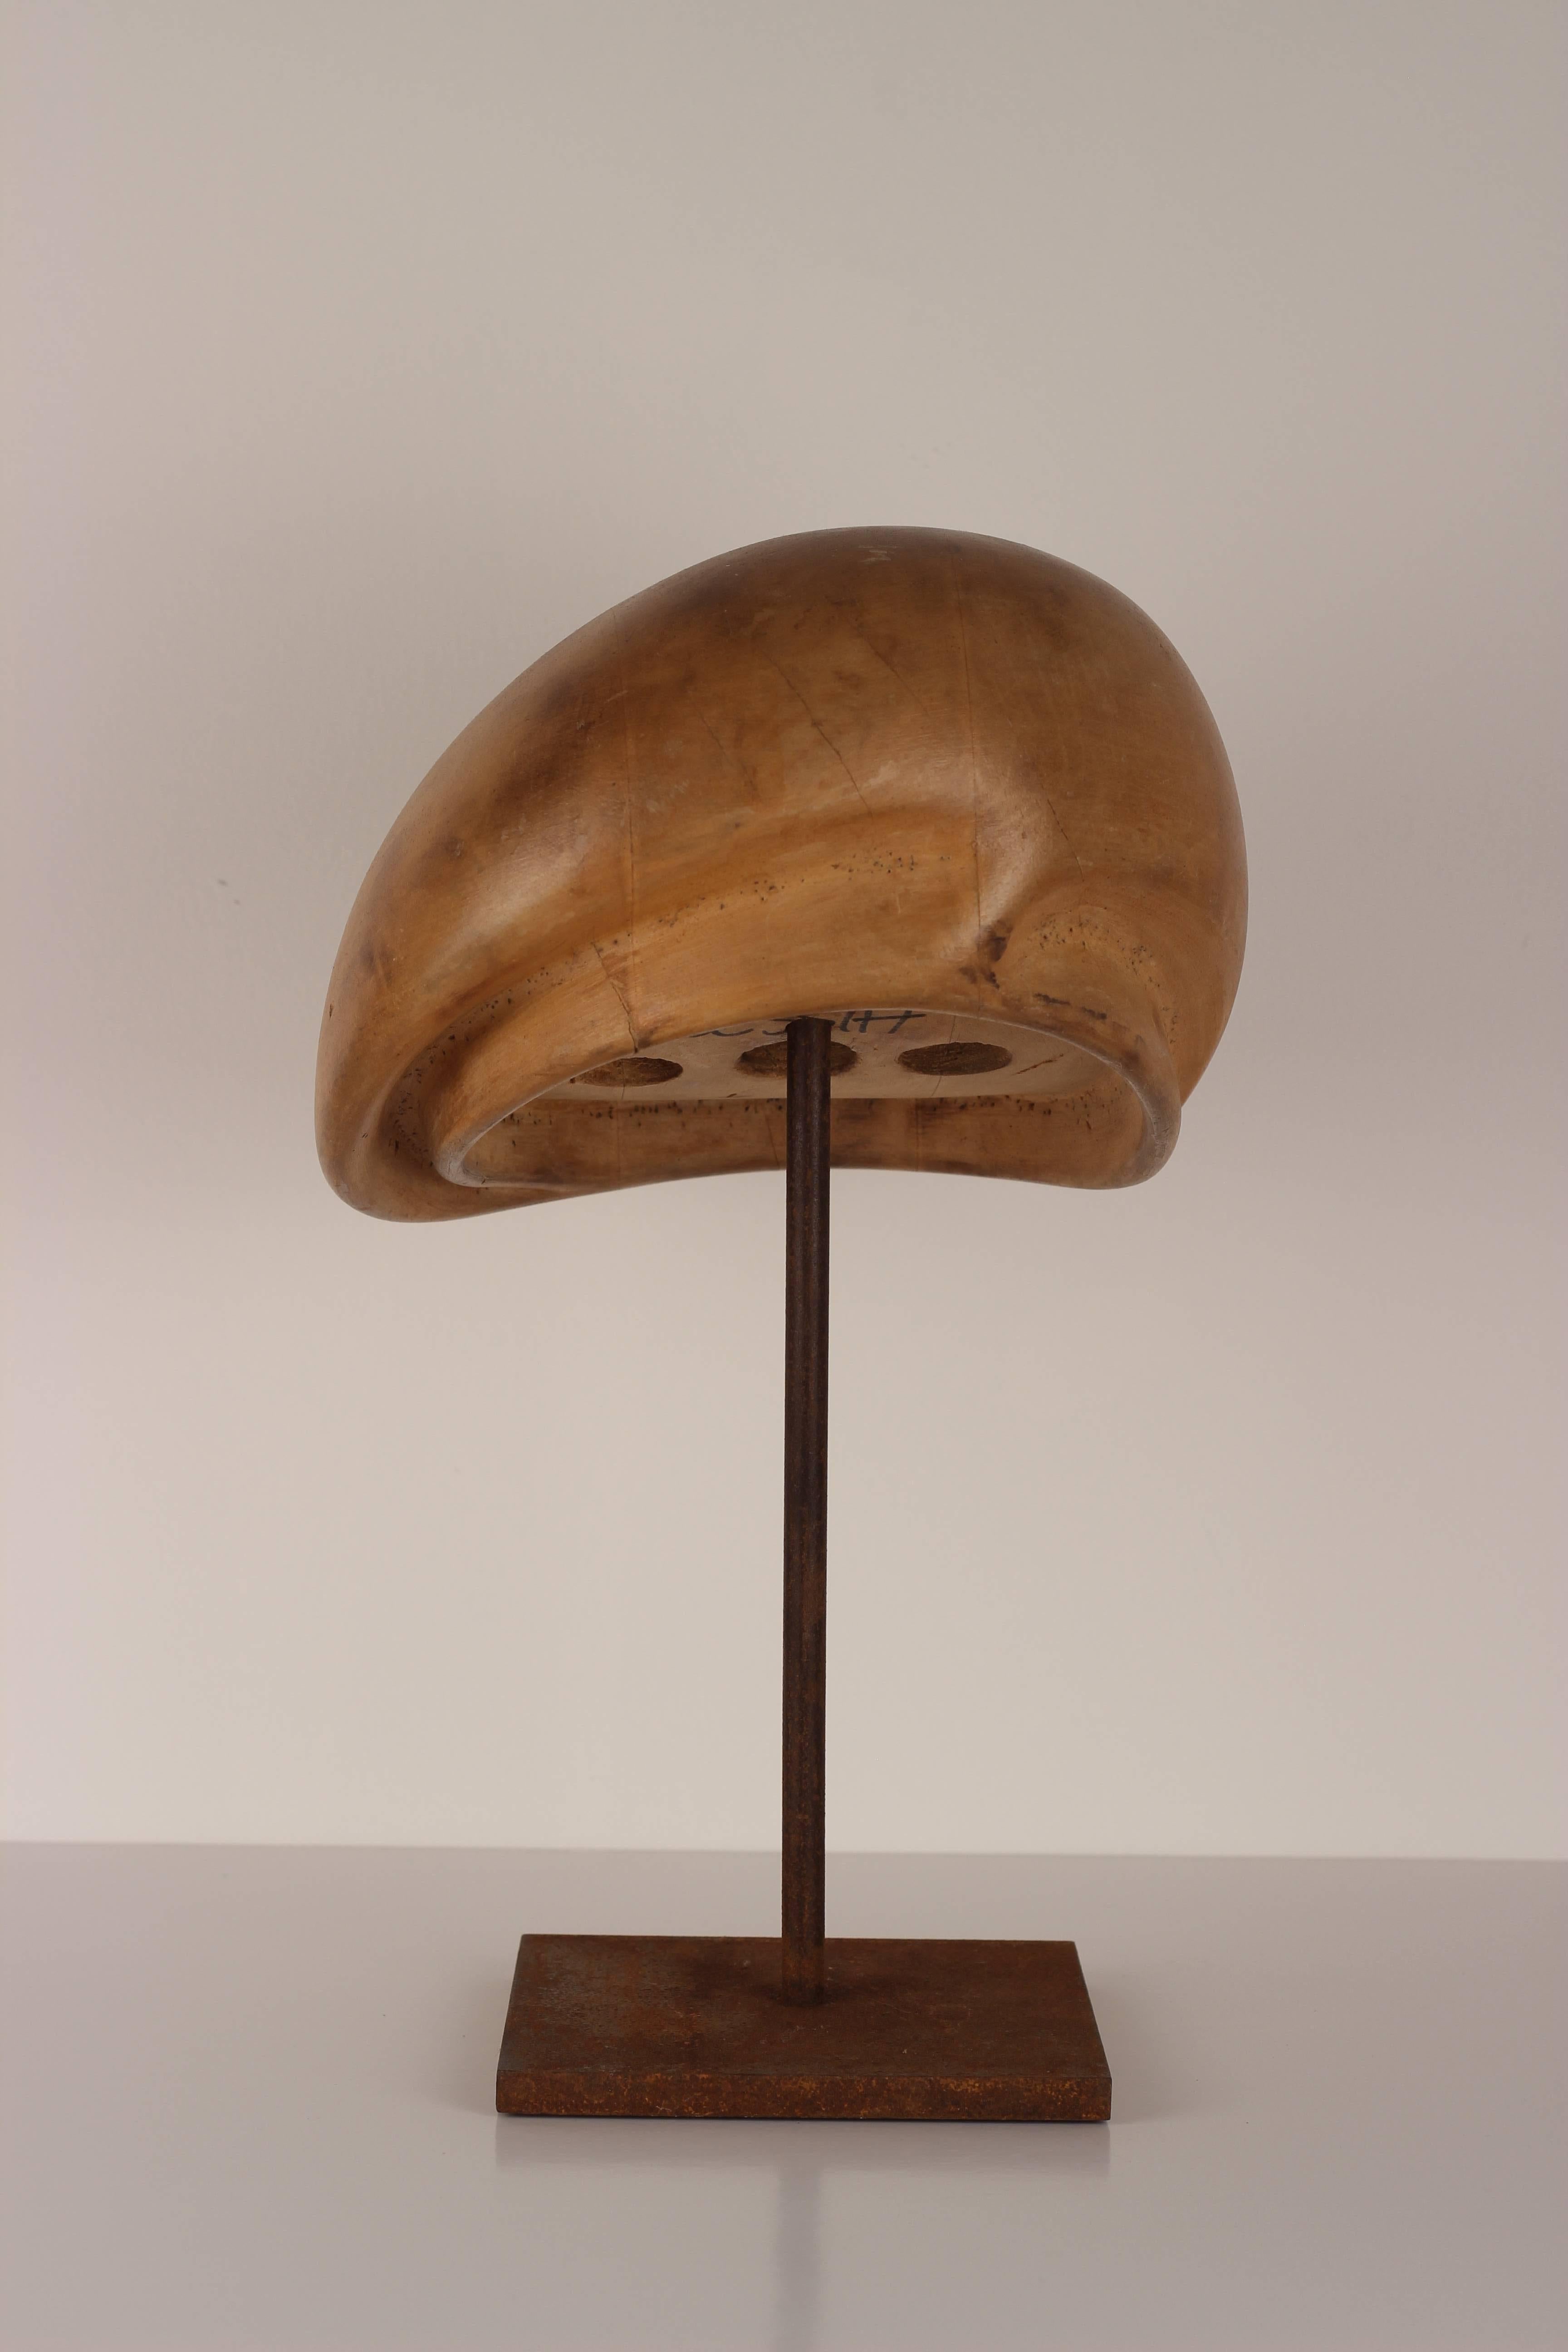 One of a collection of sculptural looking milliner wooden hat blocks from the well-known hat makers of Florence. The hat block is mounted on a metal oxidised stand.